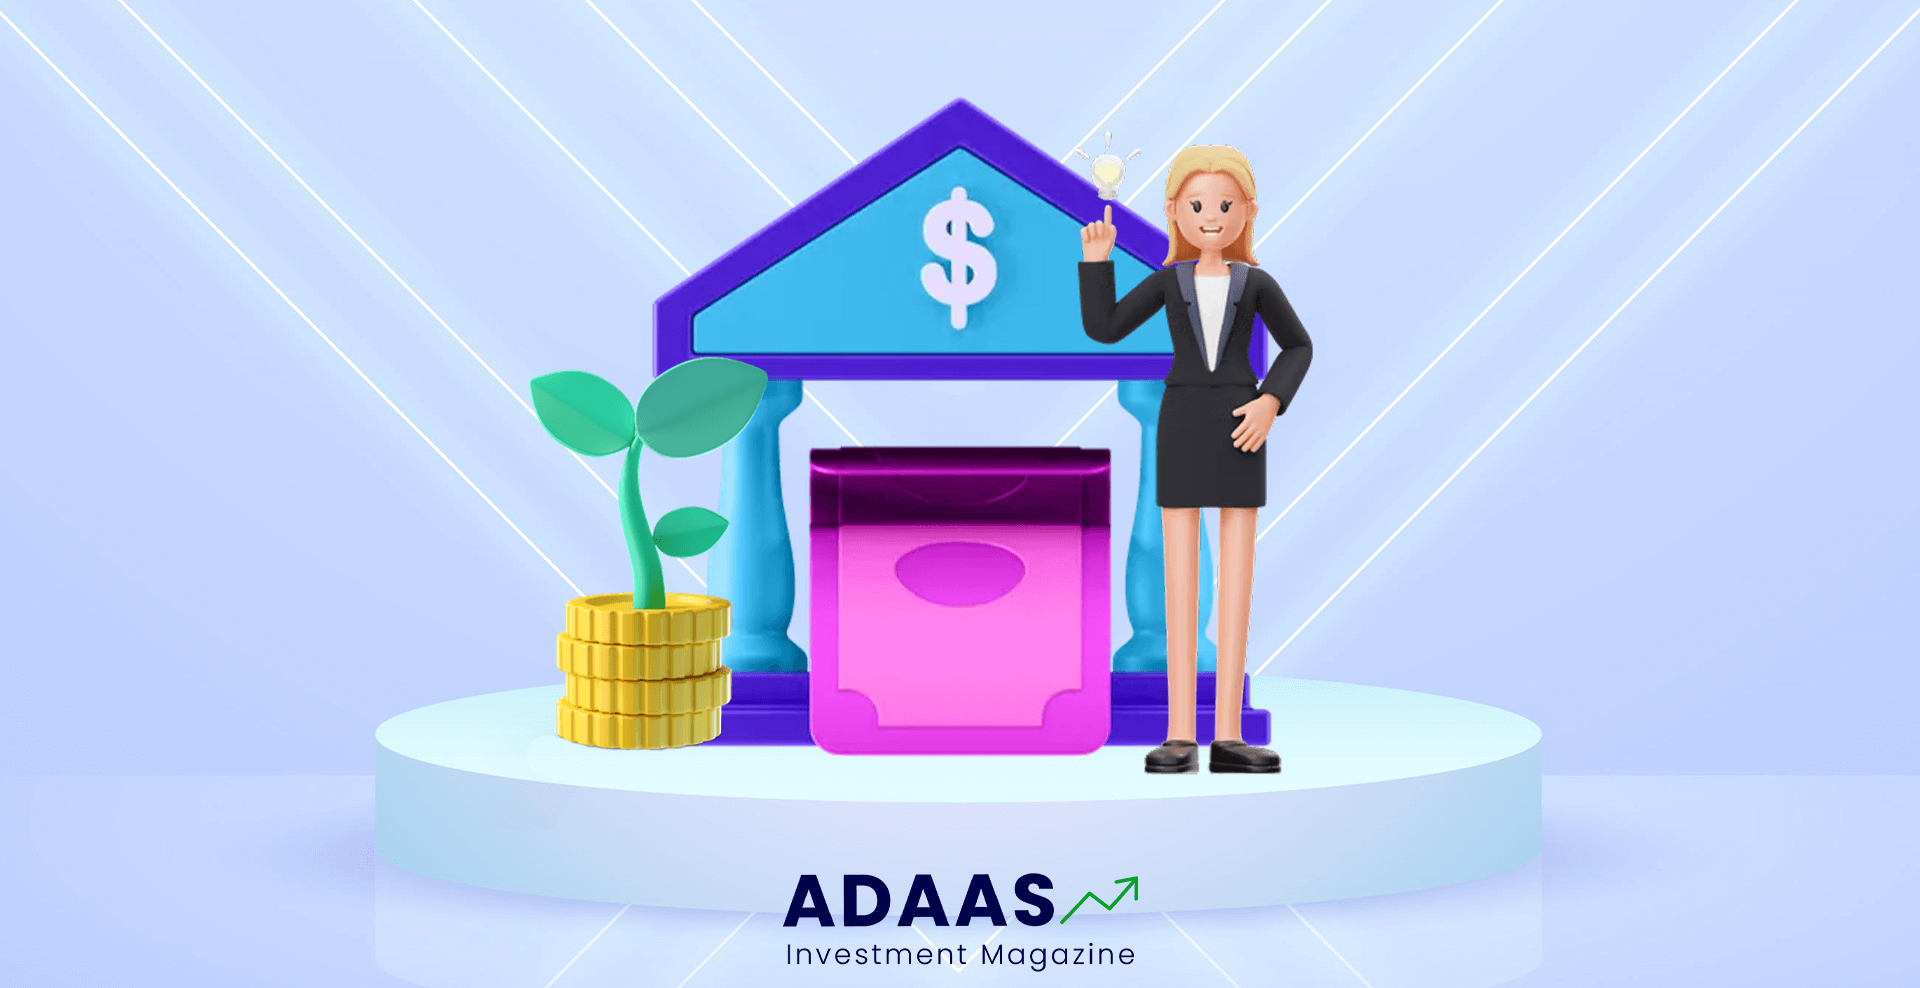 Banks and Mutual Funds. The Popular Investment Options Review! | Adaas